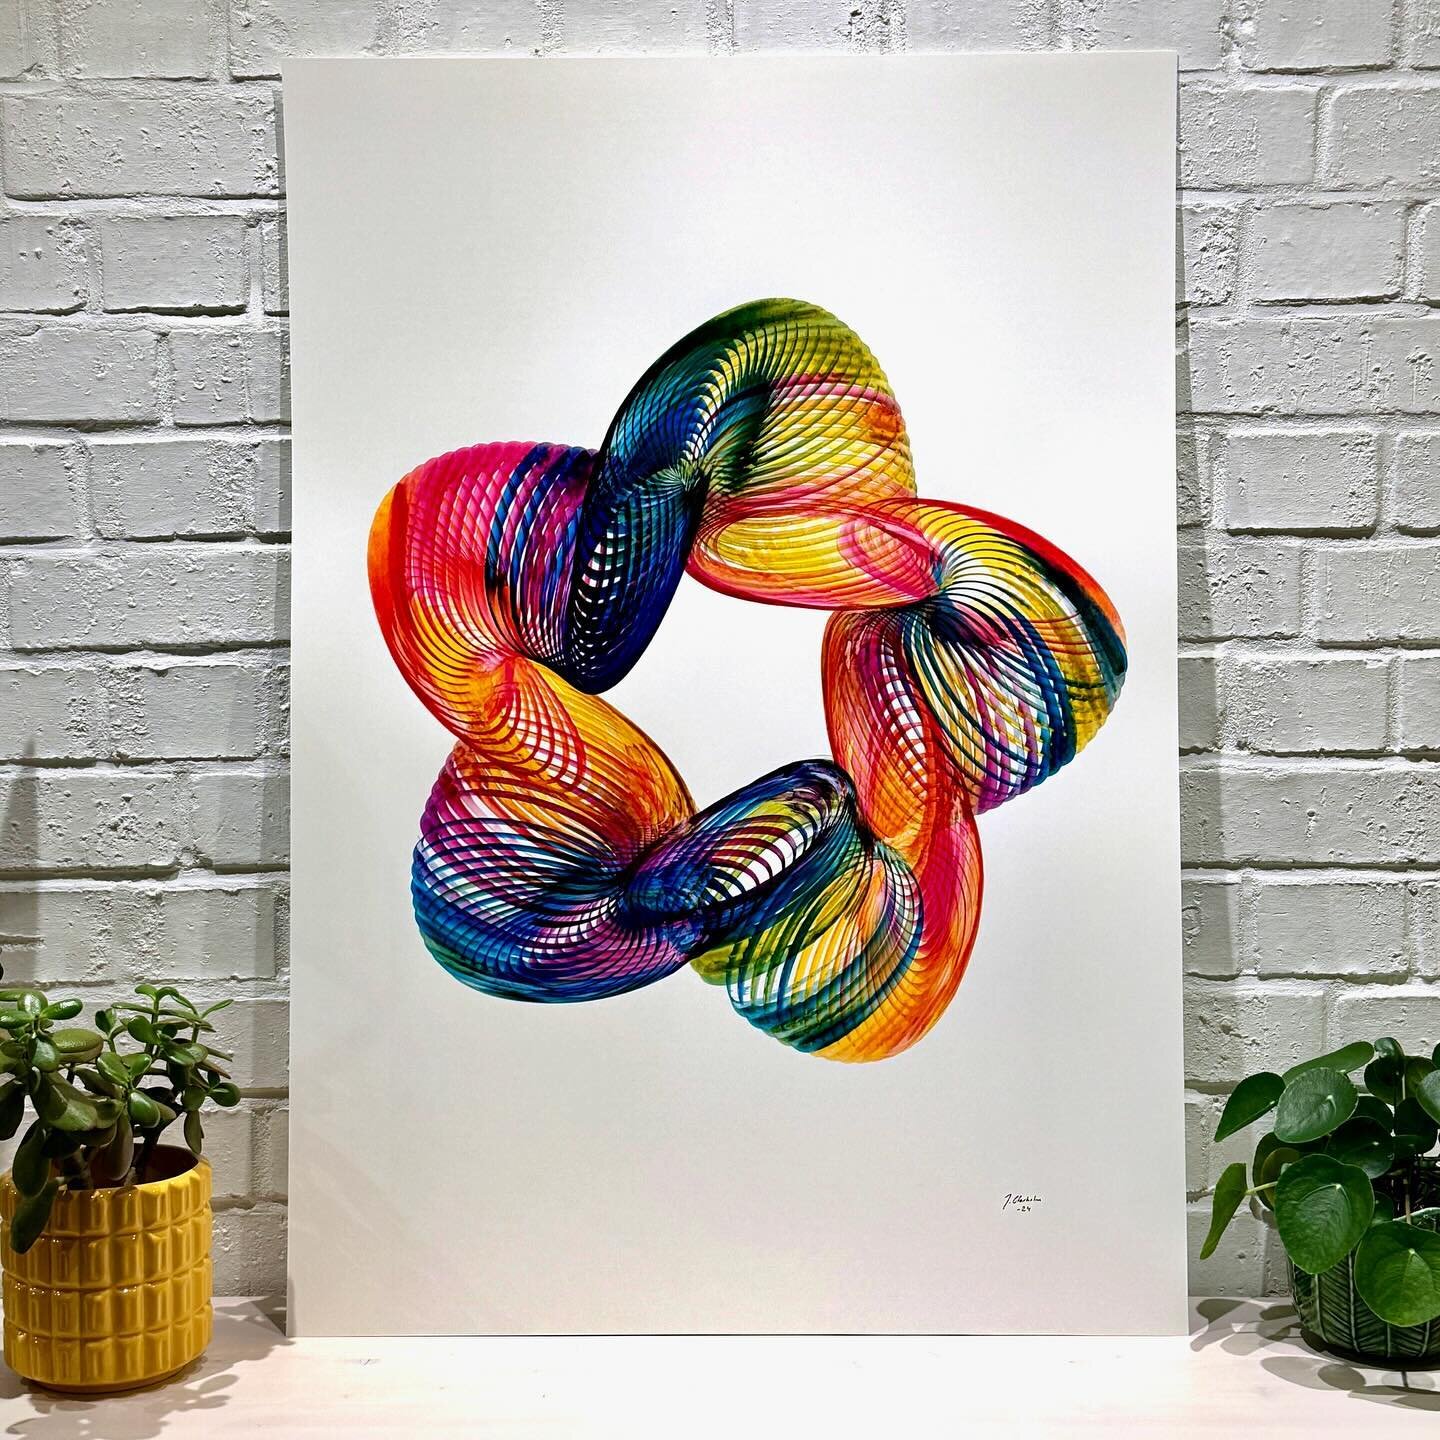 Clown DNA

PH Martin Bombay Ink Turquoise, Magenta and Golden Yellow (CMY) on 70x100cm Invercote paperboard.

Now available in the webshop.

#cmyk #linedrawing #rainbow #ink #machineart